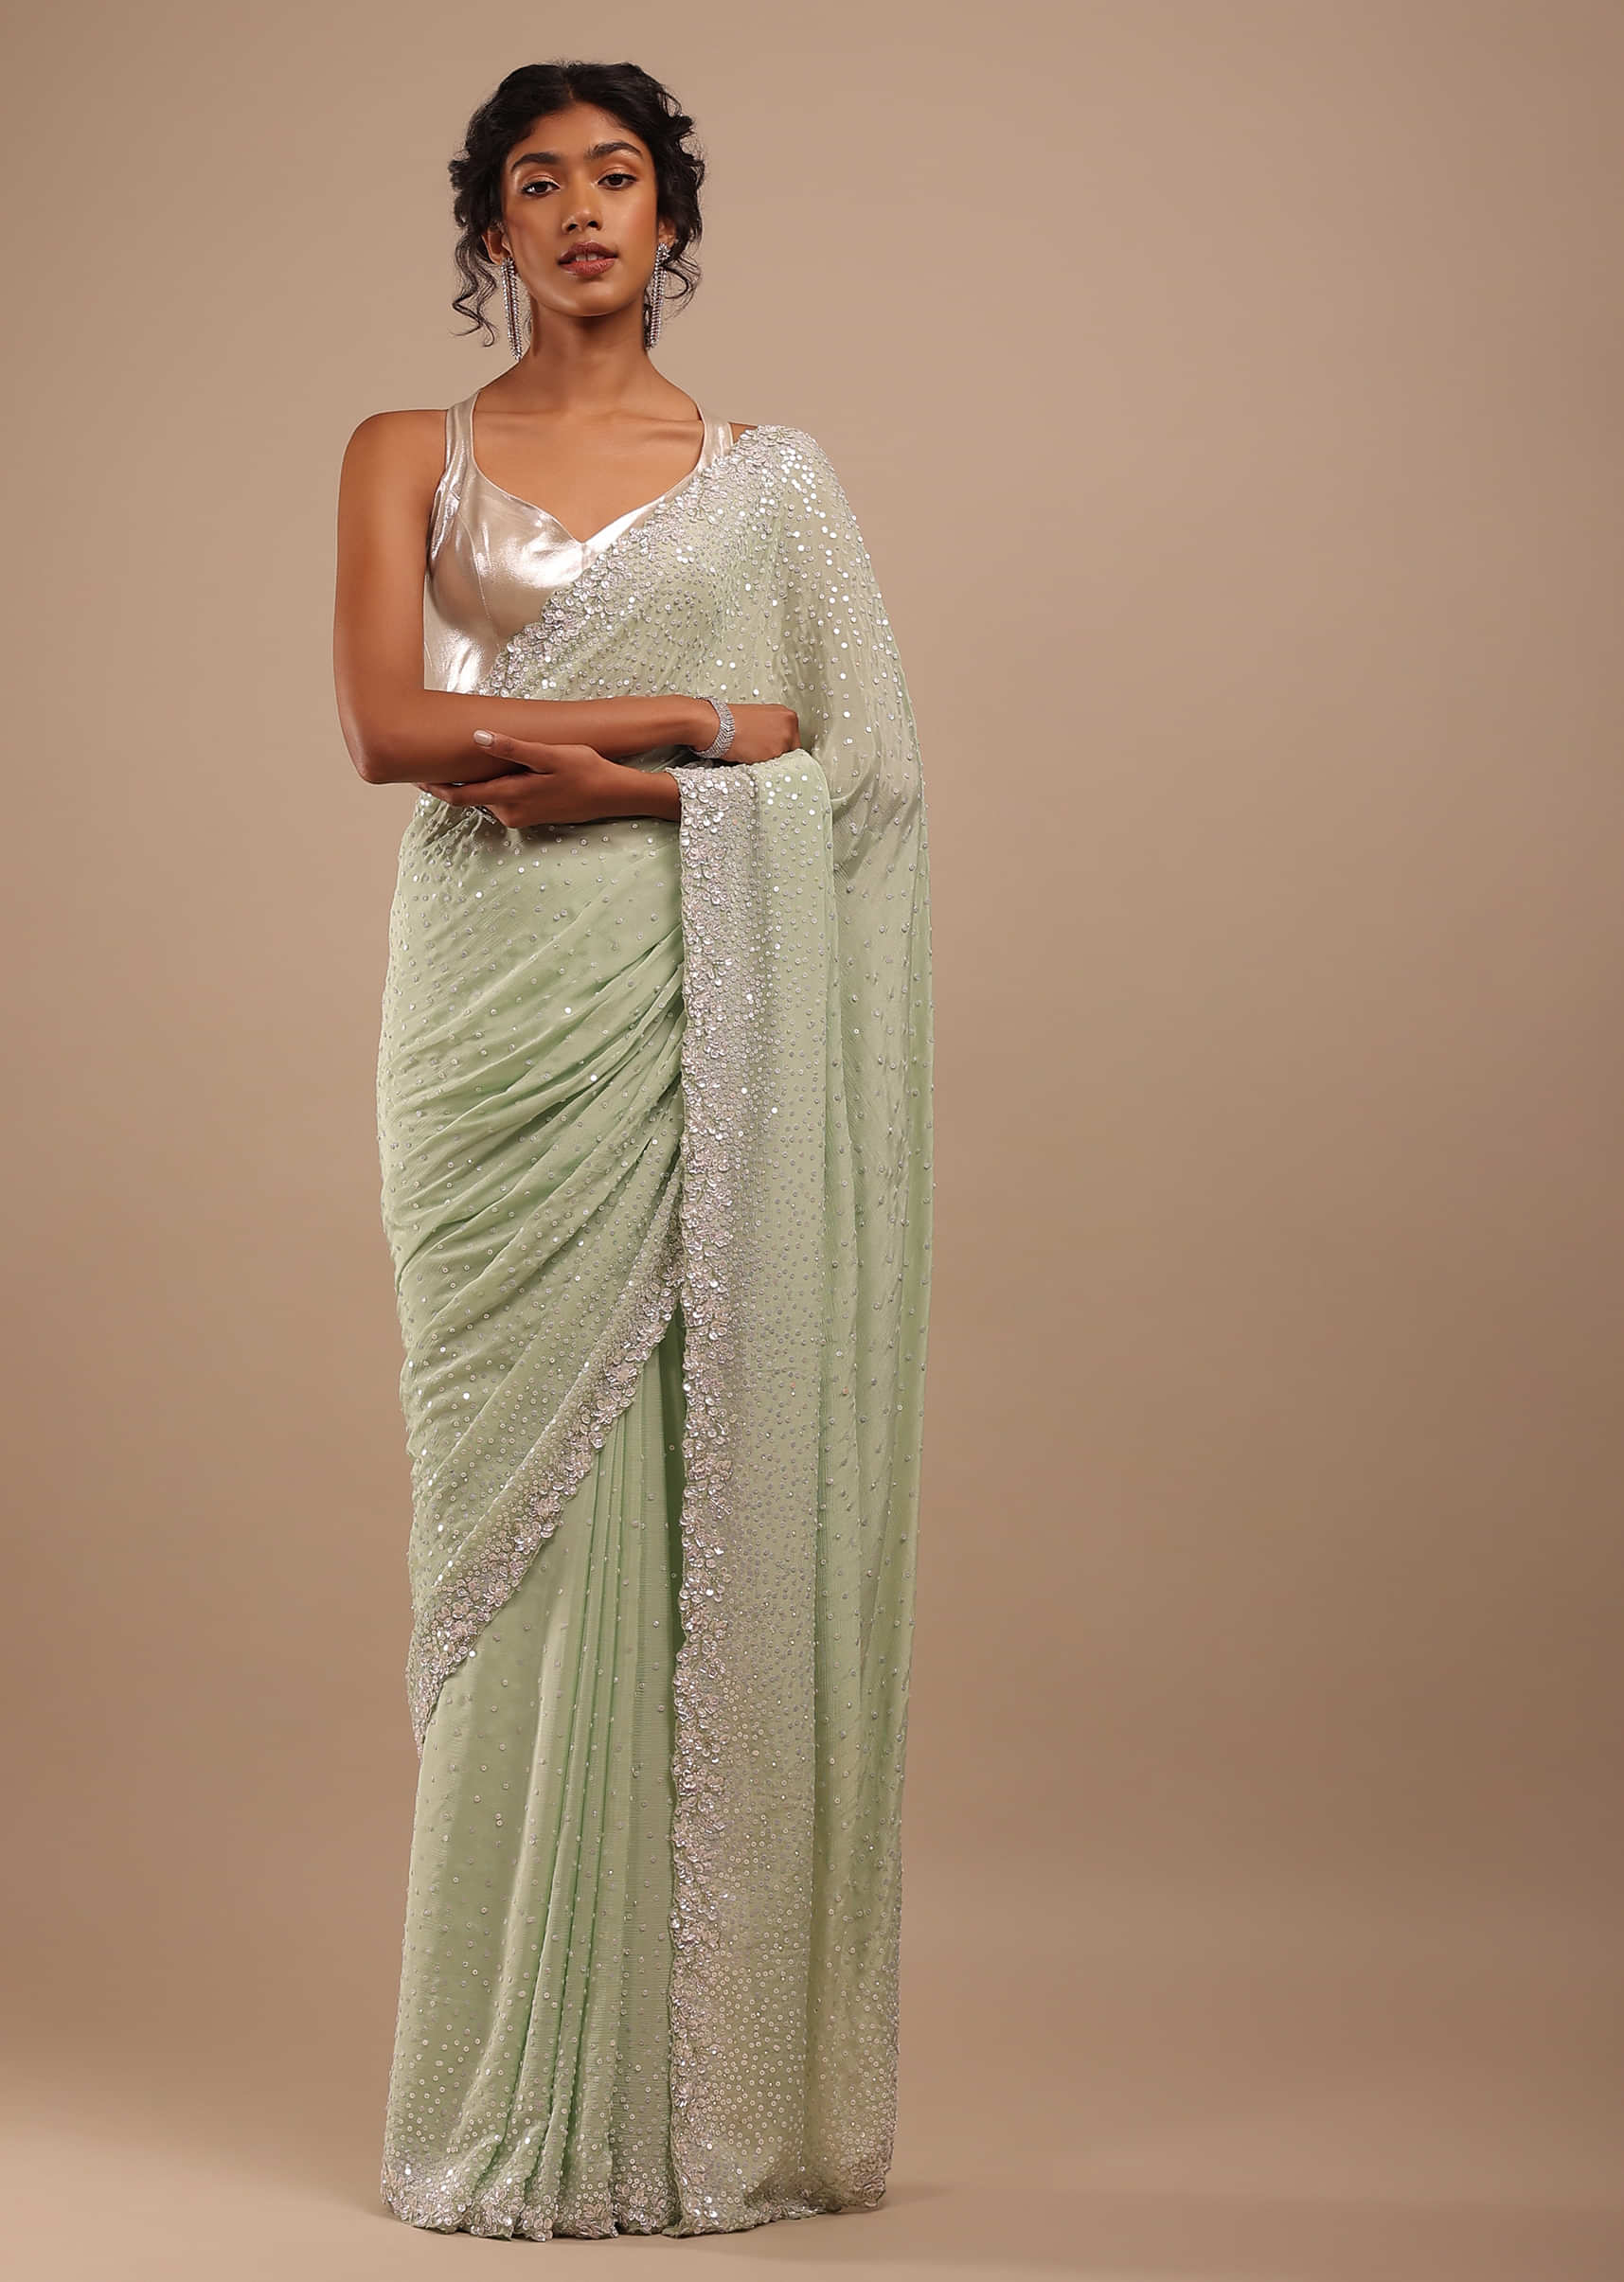 Foam Green Chiffon Saree In 3D Silver Petal And Floral Motifs Embroidery With Sequins Cascading Down